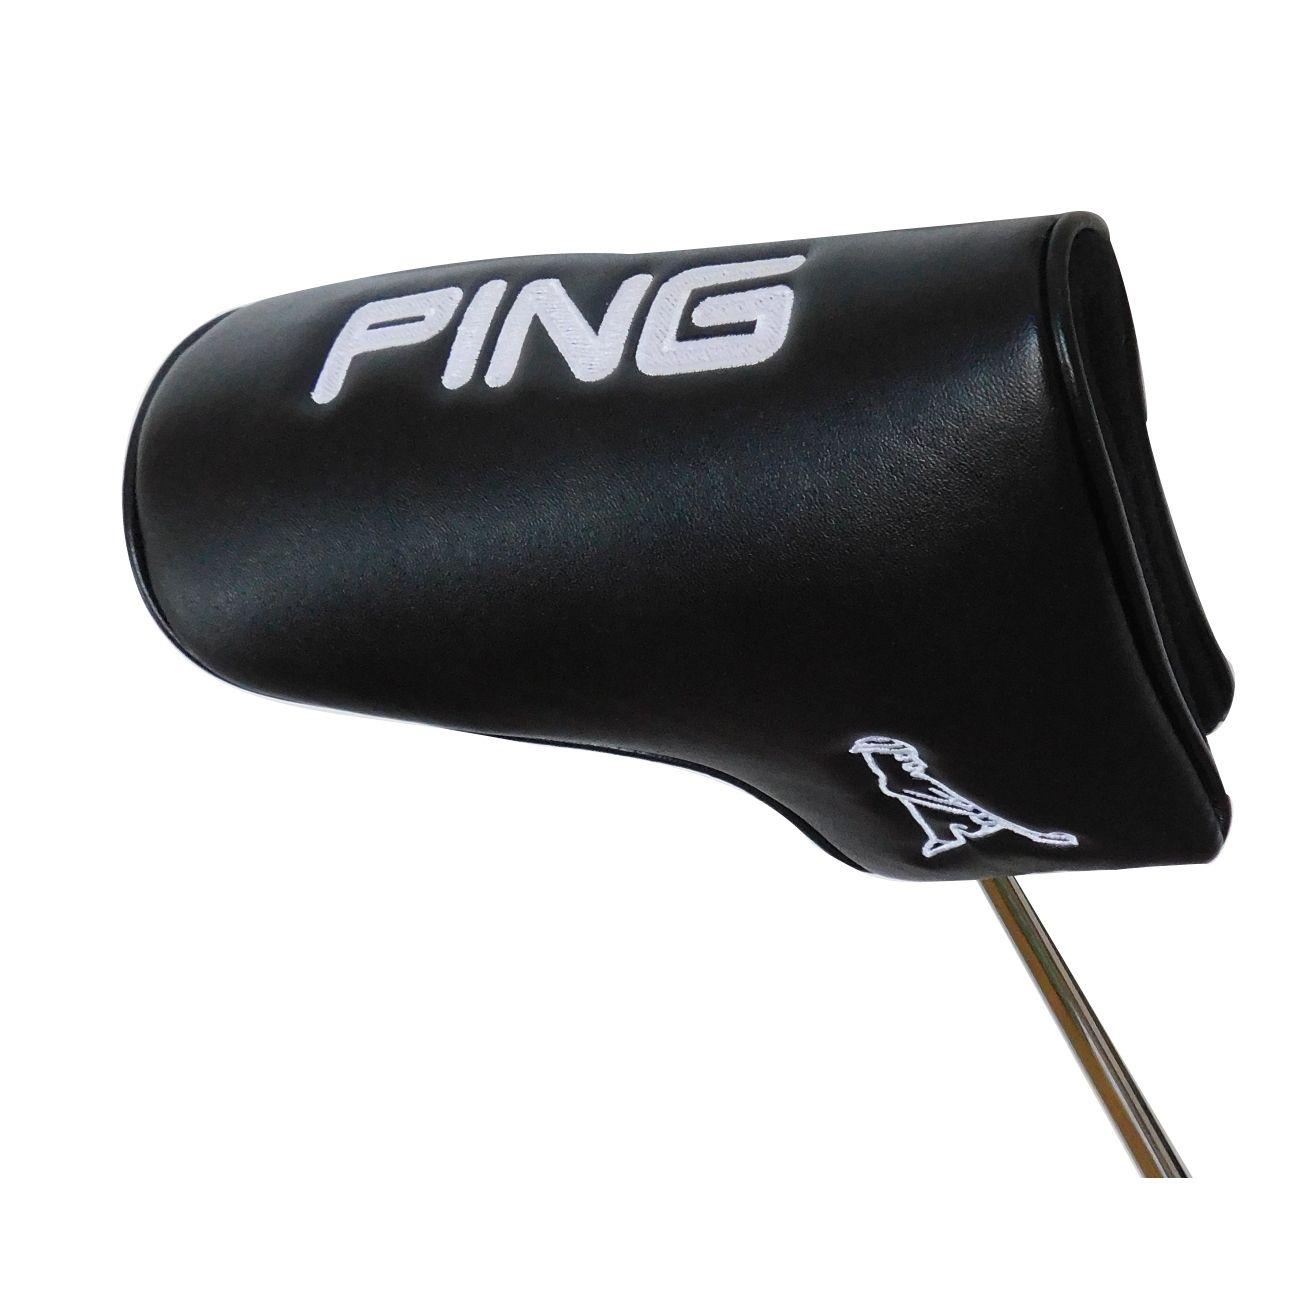 Mr. Ping Logo - PING Putter Head Cover - O'Dwyers Golf Store